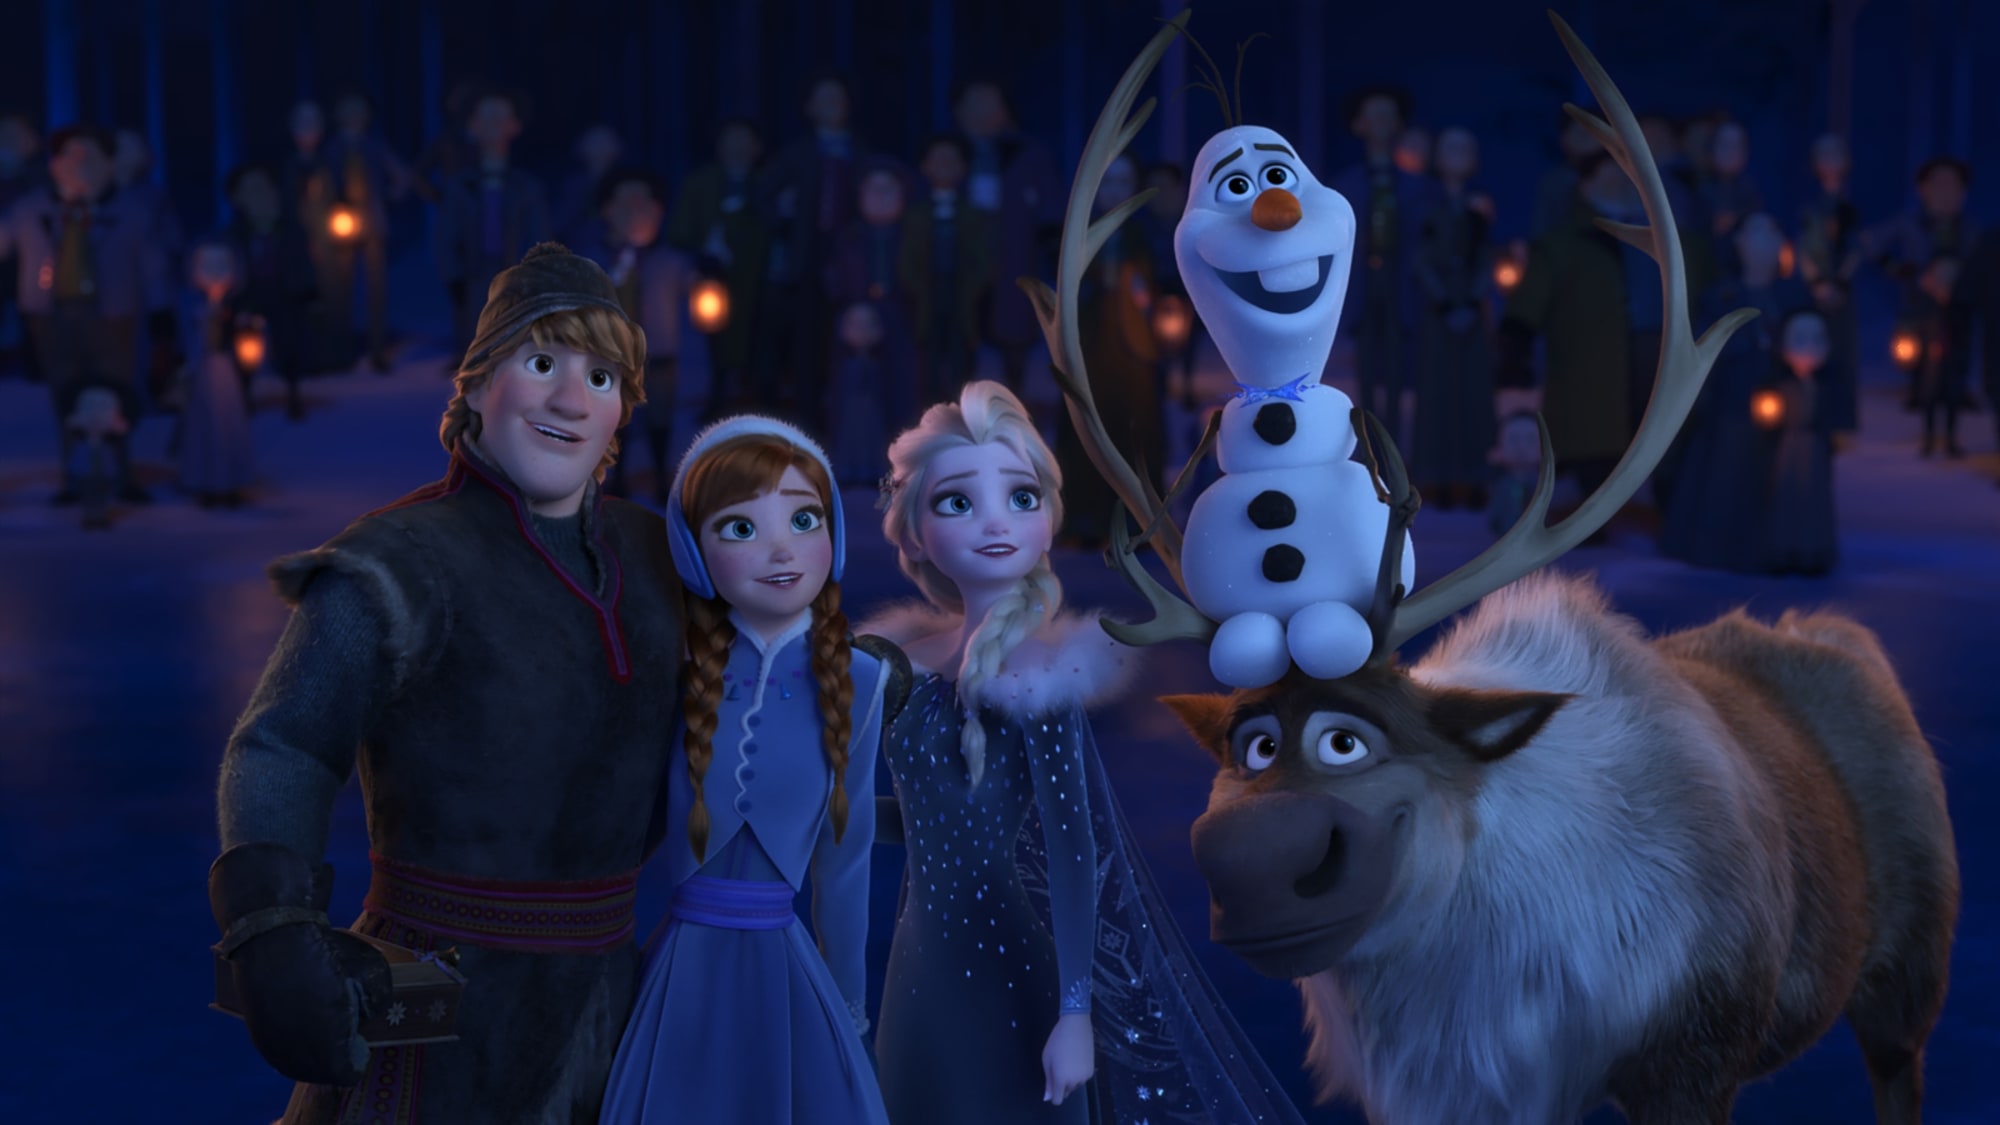 Toy Story 5', 'Frozen 3', and 'Zootopia 2' Announced - Movie News Net